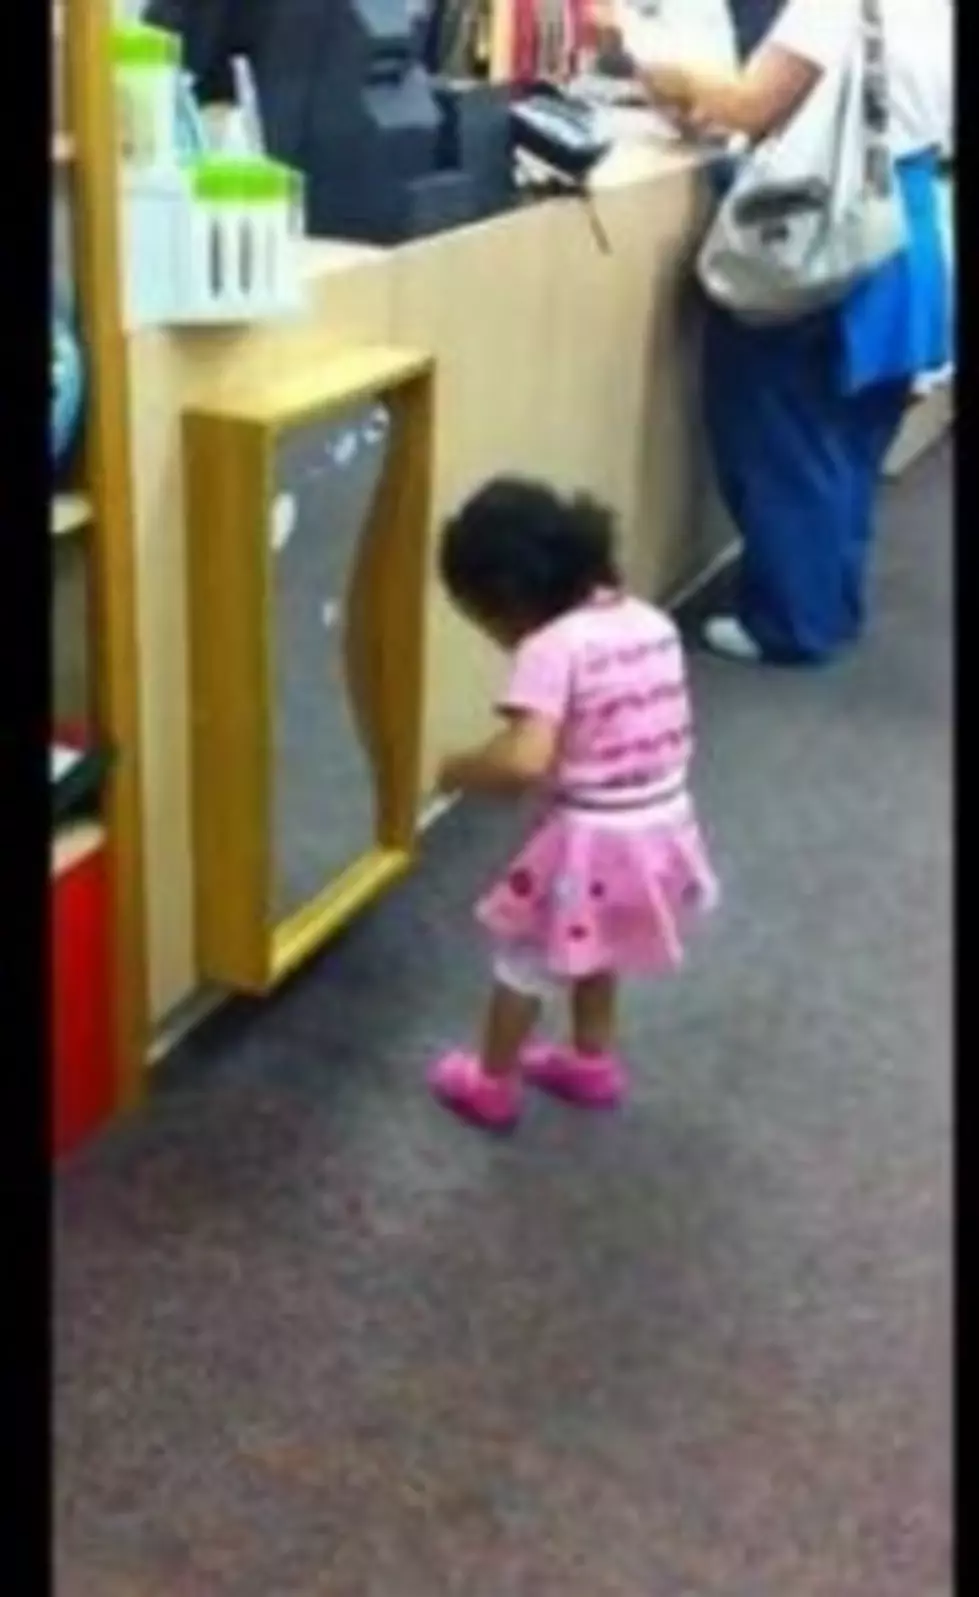 Toddler Busts A Move After Checking Herself Out In A Store Mirror [Video]